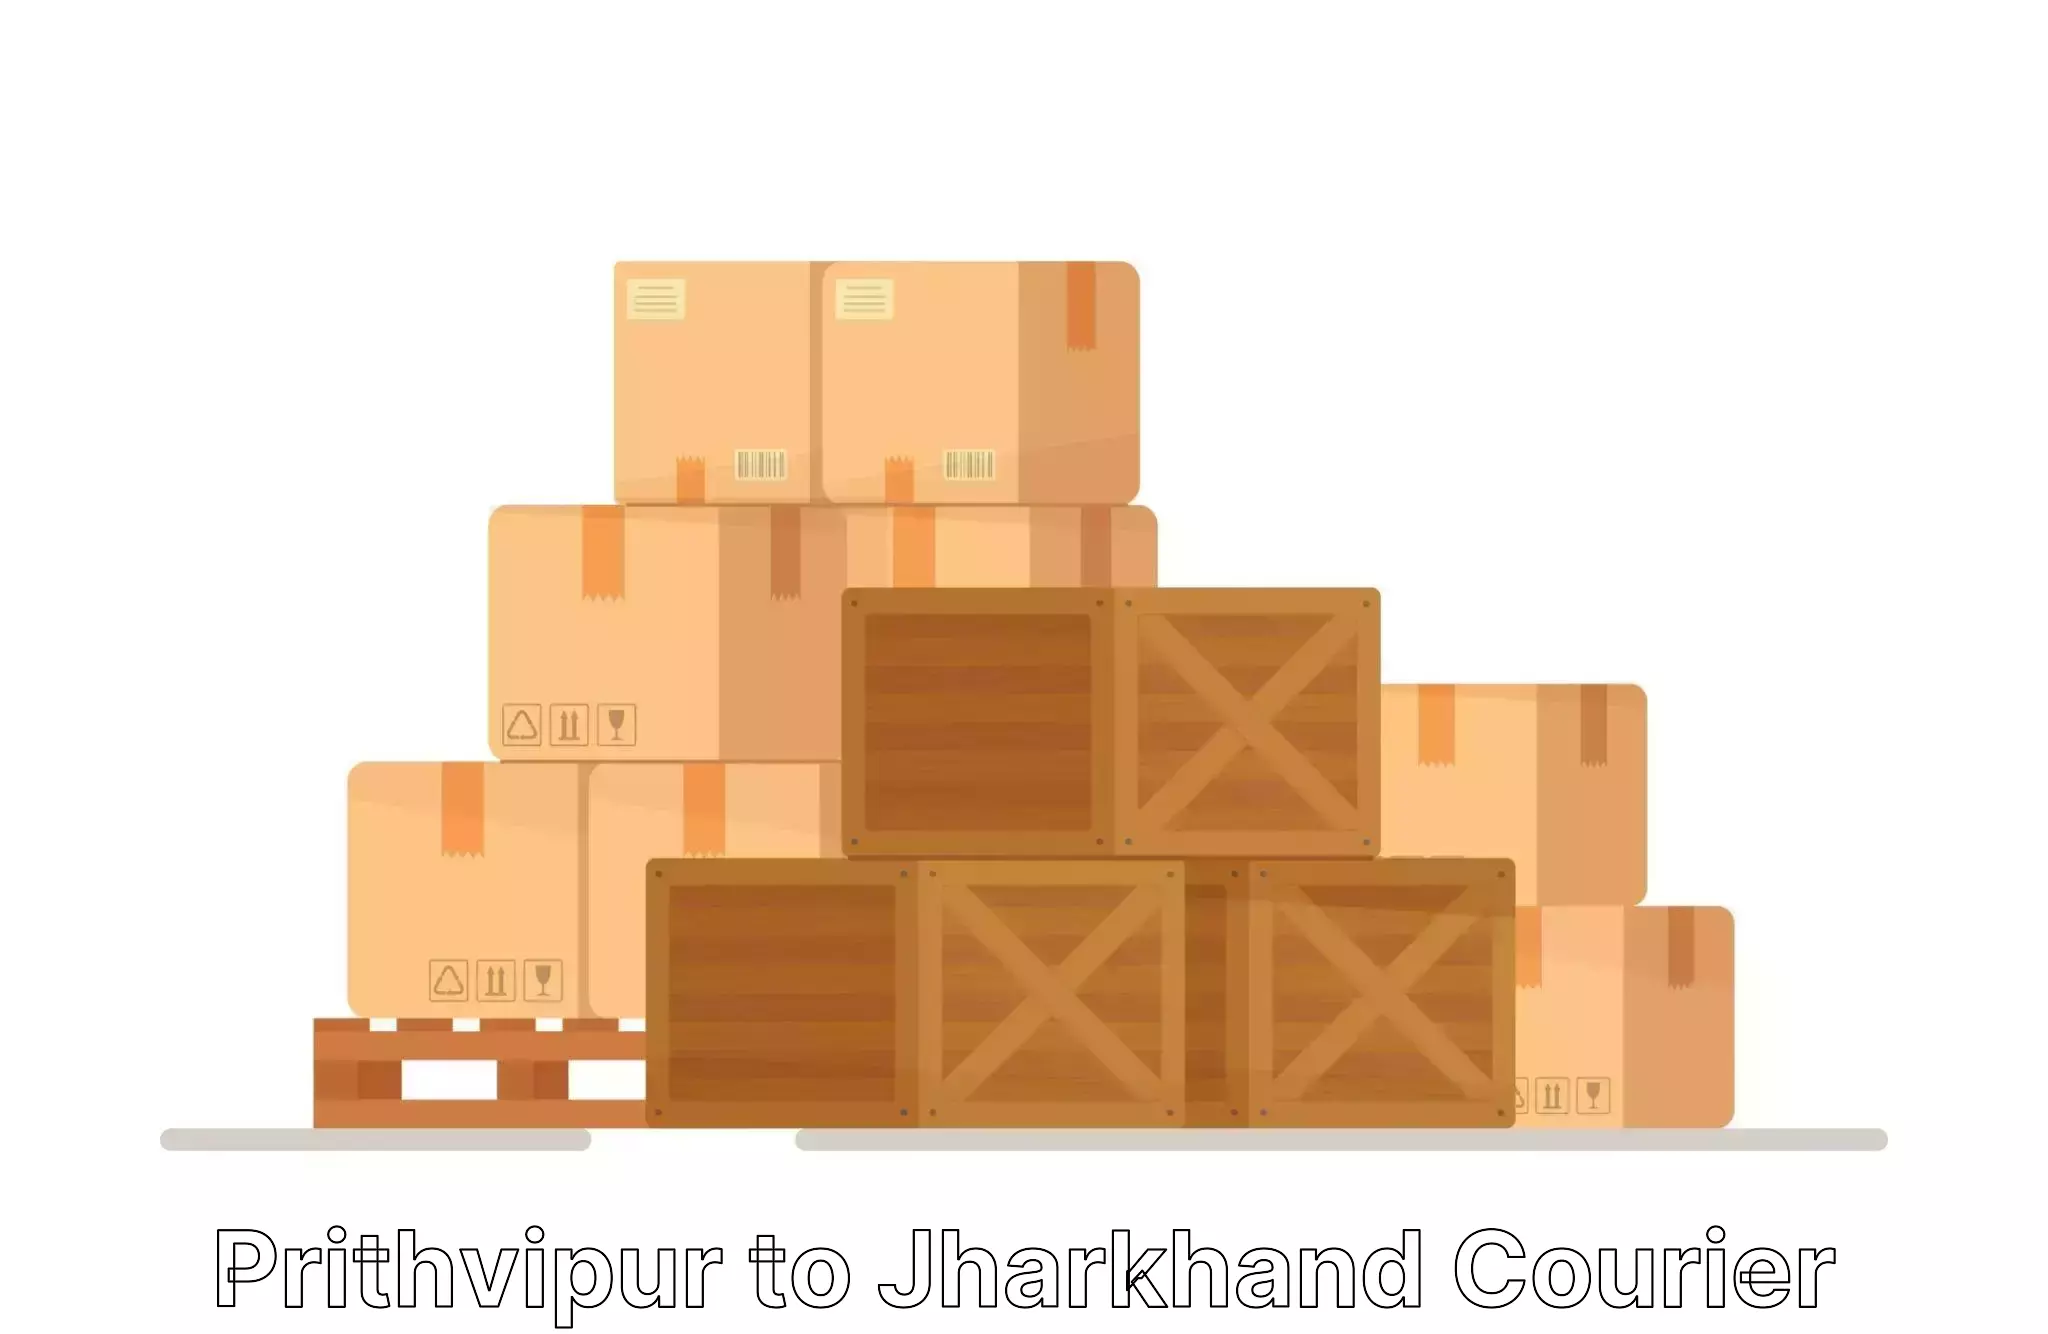 Furniture relocation services Prithvipur to Jharkhand